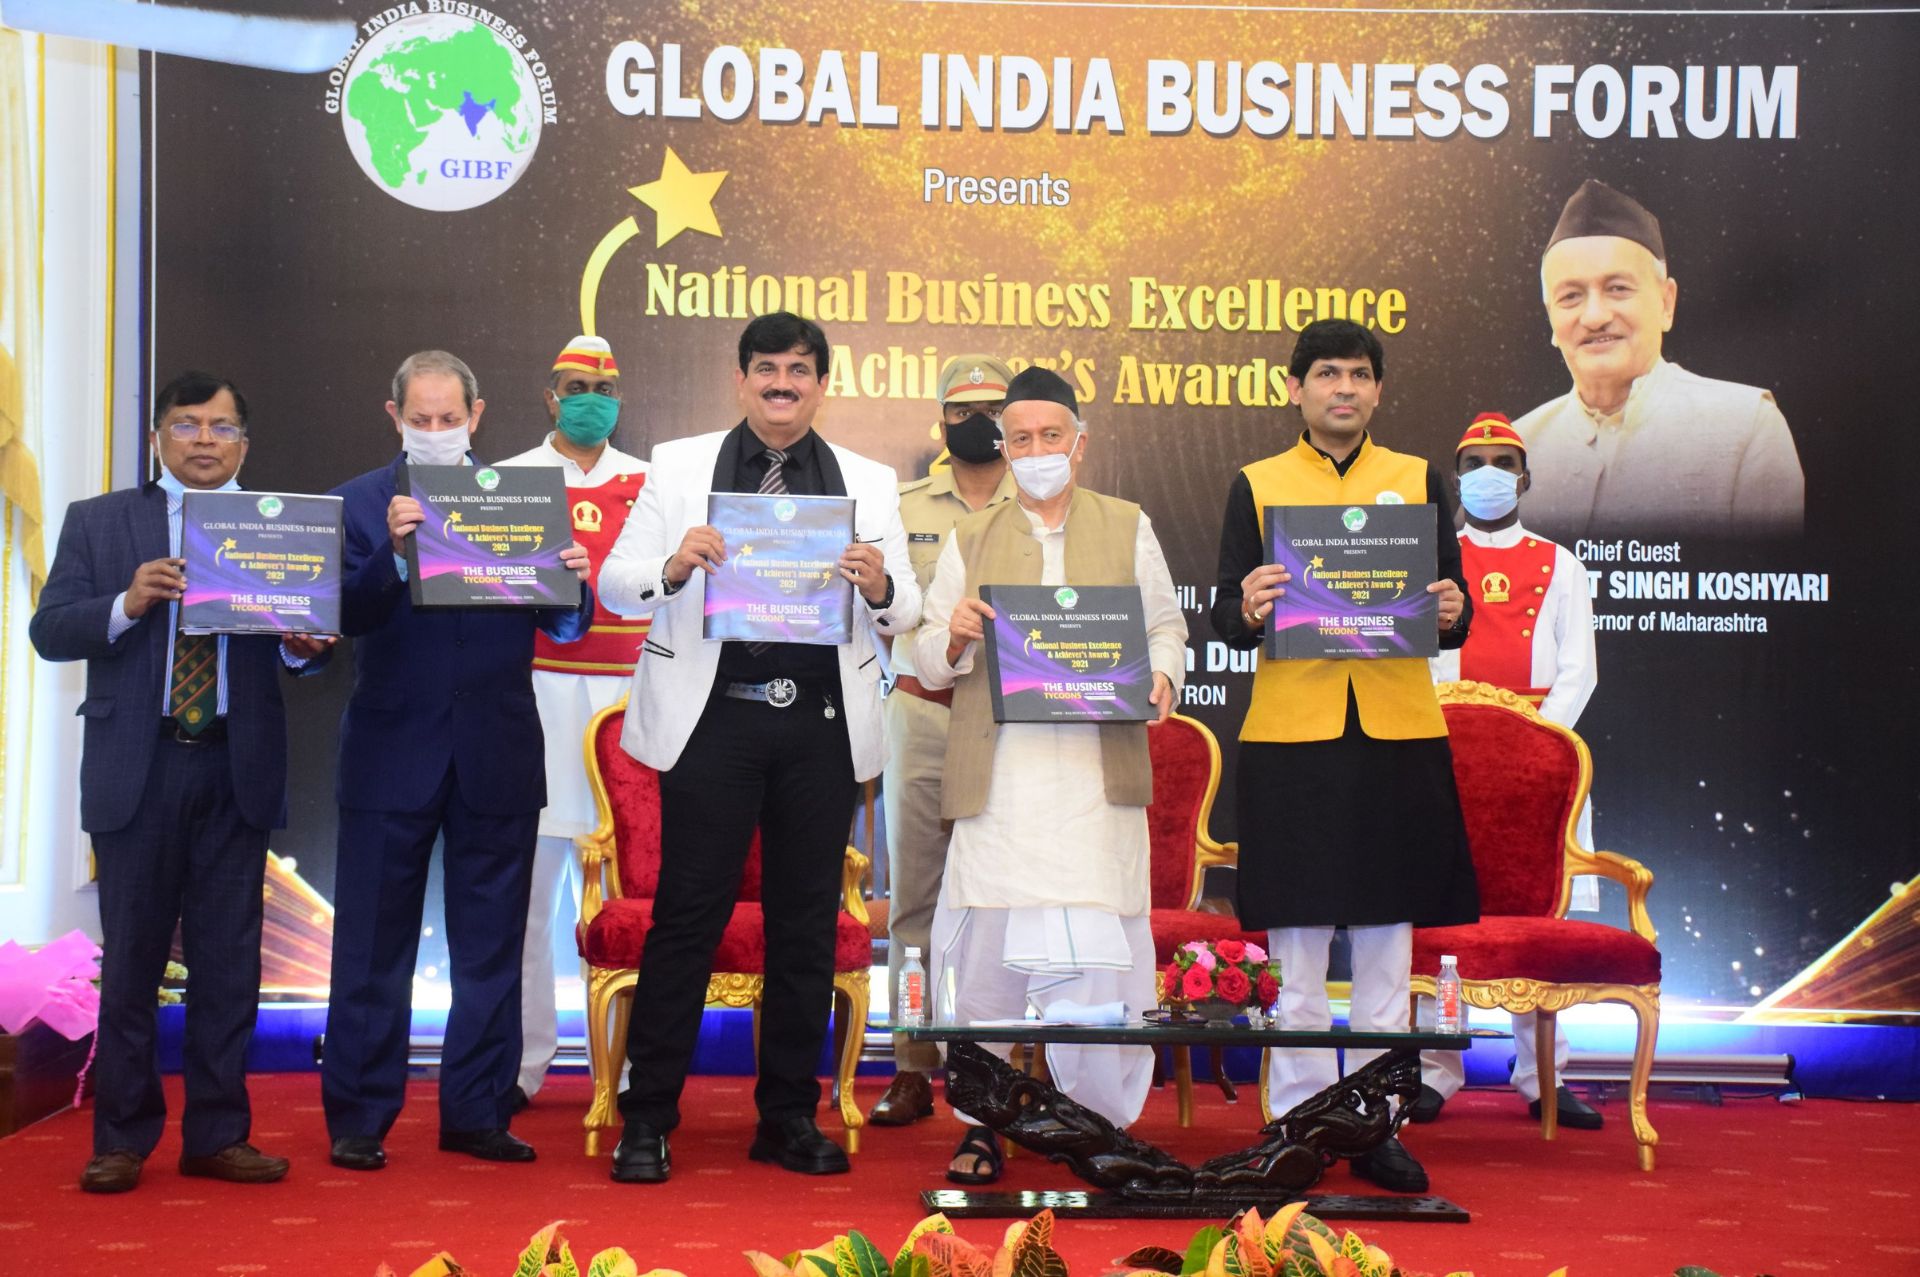 inauguration-of-the-business-tycoons-magazine-gibf-national-business-excellence-and-achievers-awards